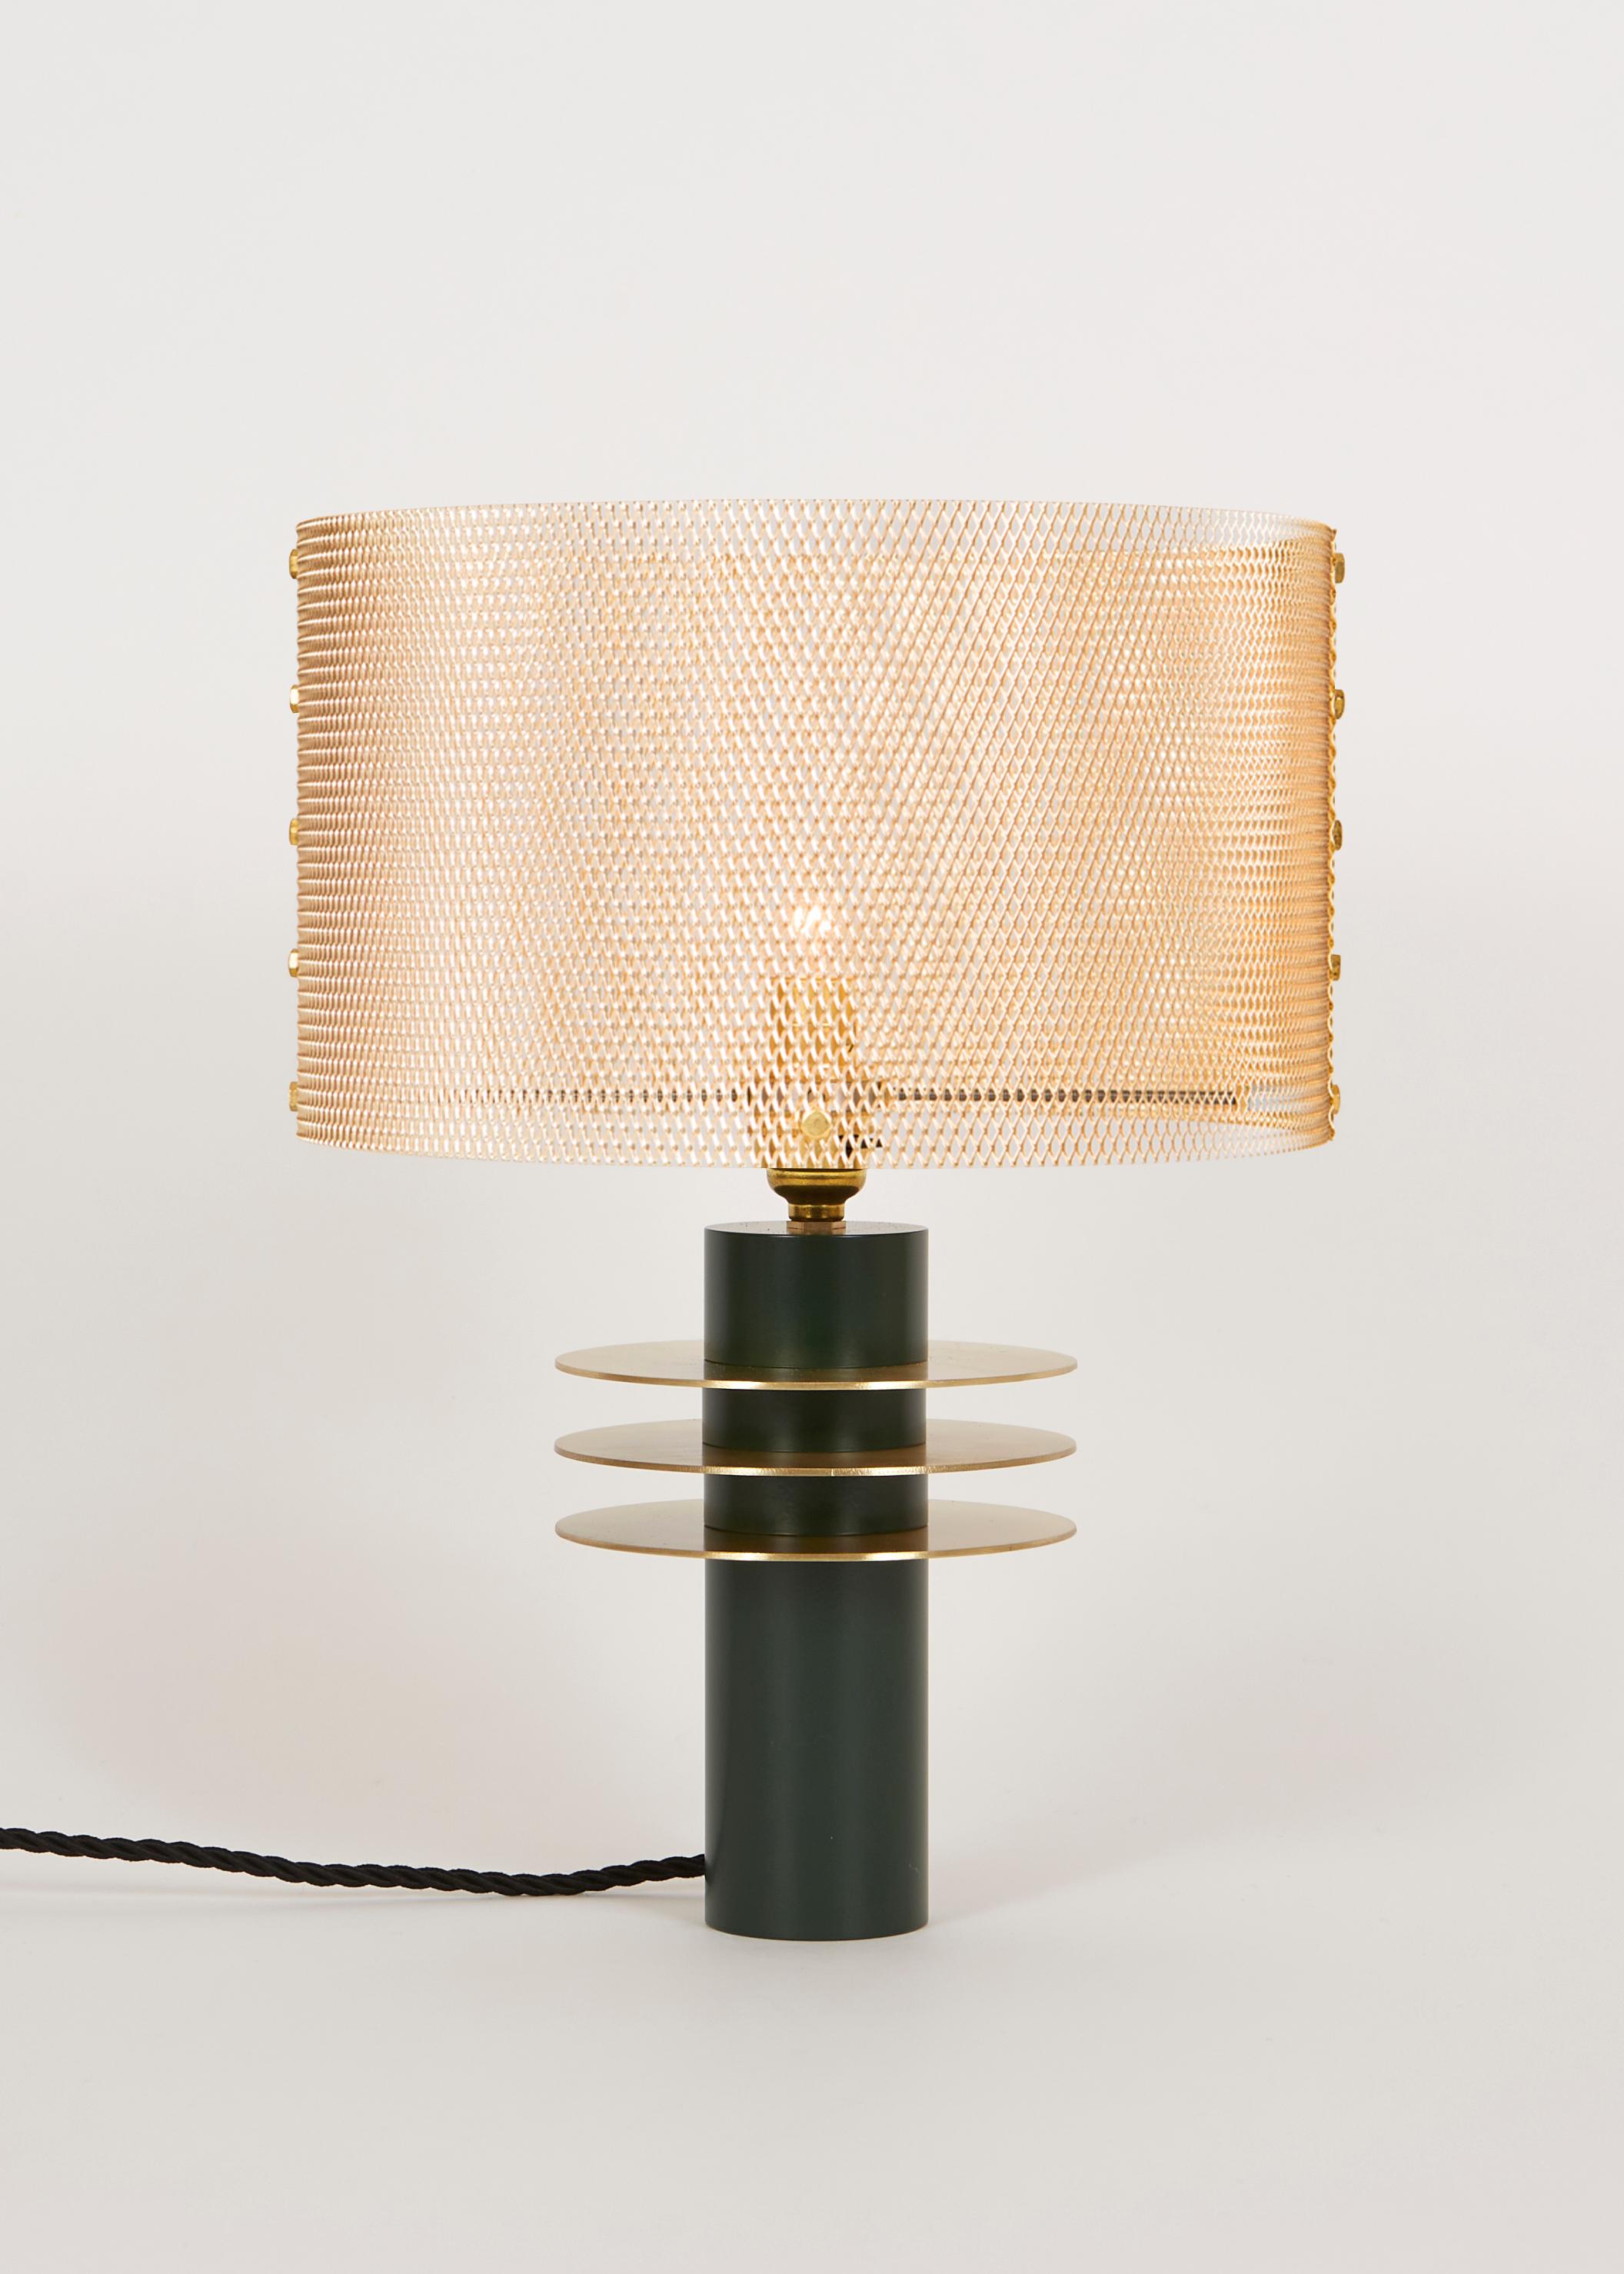 Expanded metal has become a recognisable trademark of Studio Marine Breynaert. The shades form a regular lace. Light lives through the mesh, it is not frozen, it moves and draws changing shadows.
These lamps are suitable for lighting a living room,